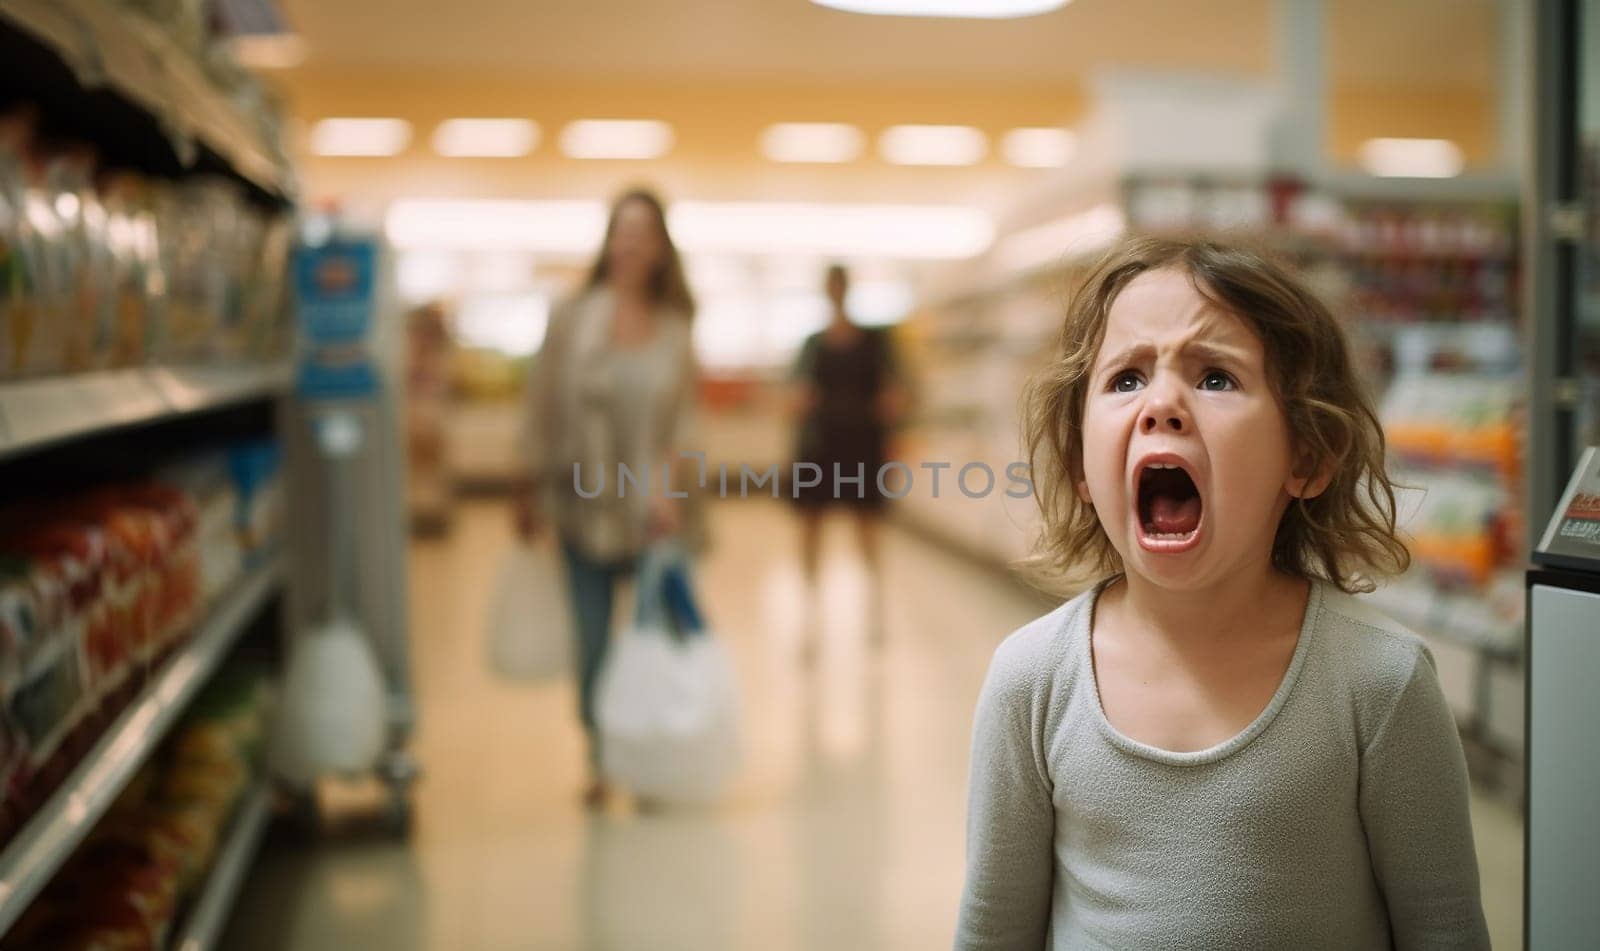 Upset hysterical child crying loudly while manipulating parents and standing against food stall in supermarket. Child misbehave in grocery store copy space Space for text